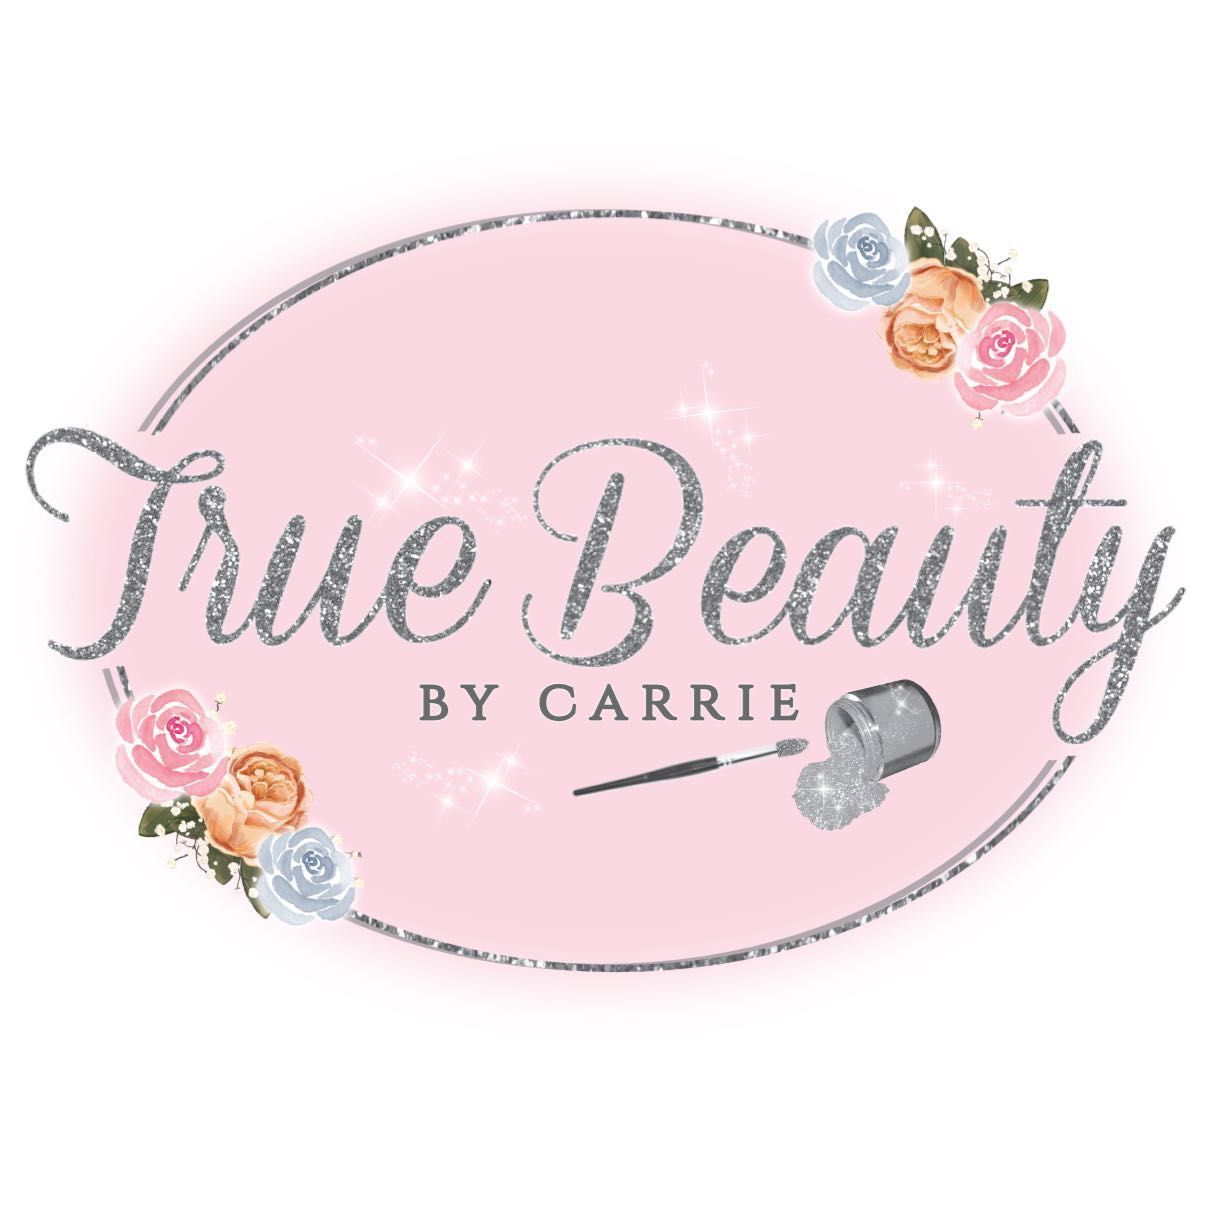 True Beauty By Carrie, 37 Eaton Gardens, L12 3HL, Liverpool